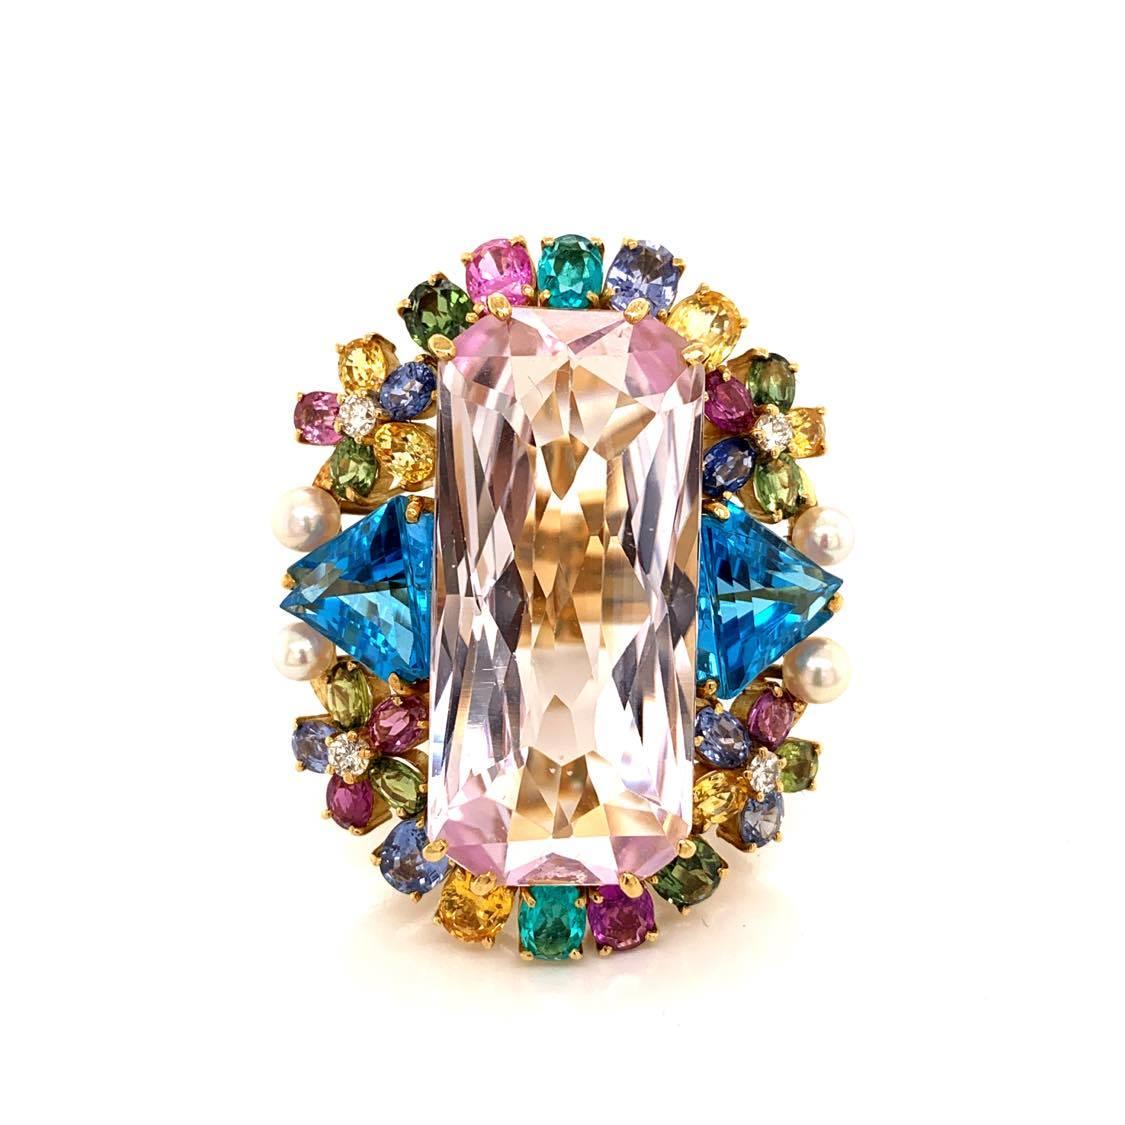 Wow! A guaranteed stunner! This large cocktail ring features a large rectangular shaped pink kunzite weighing 30 carats. Around the center stone is a bouquet of multicolored gemstones which include two fine paraiba tourmalines on the top and bottom